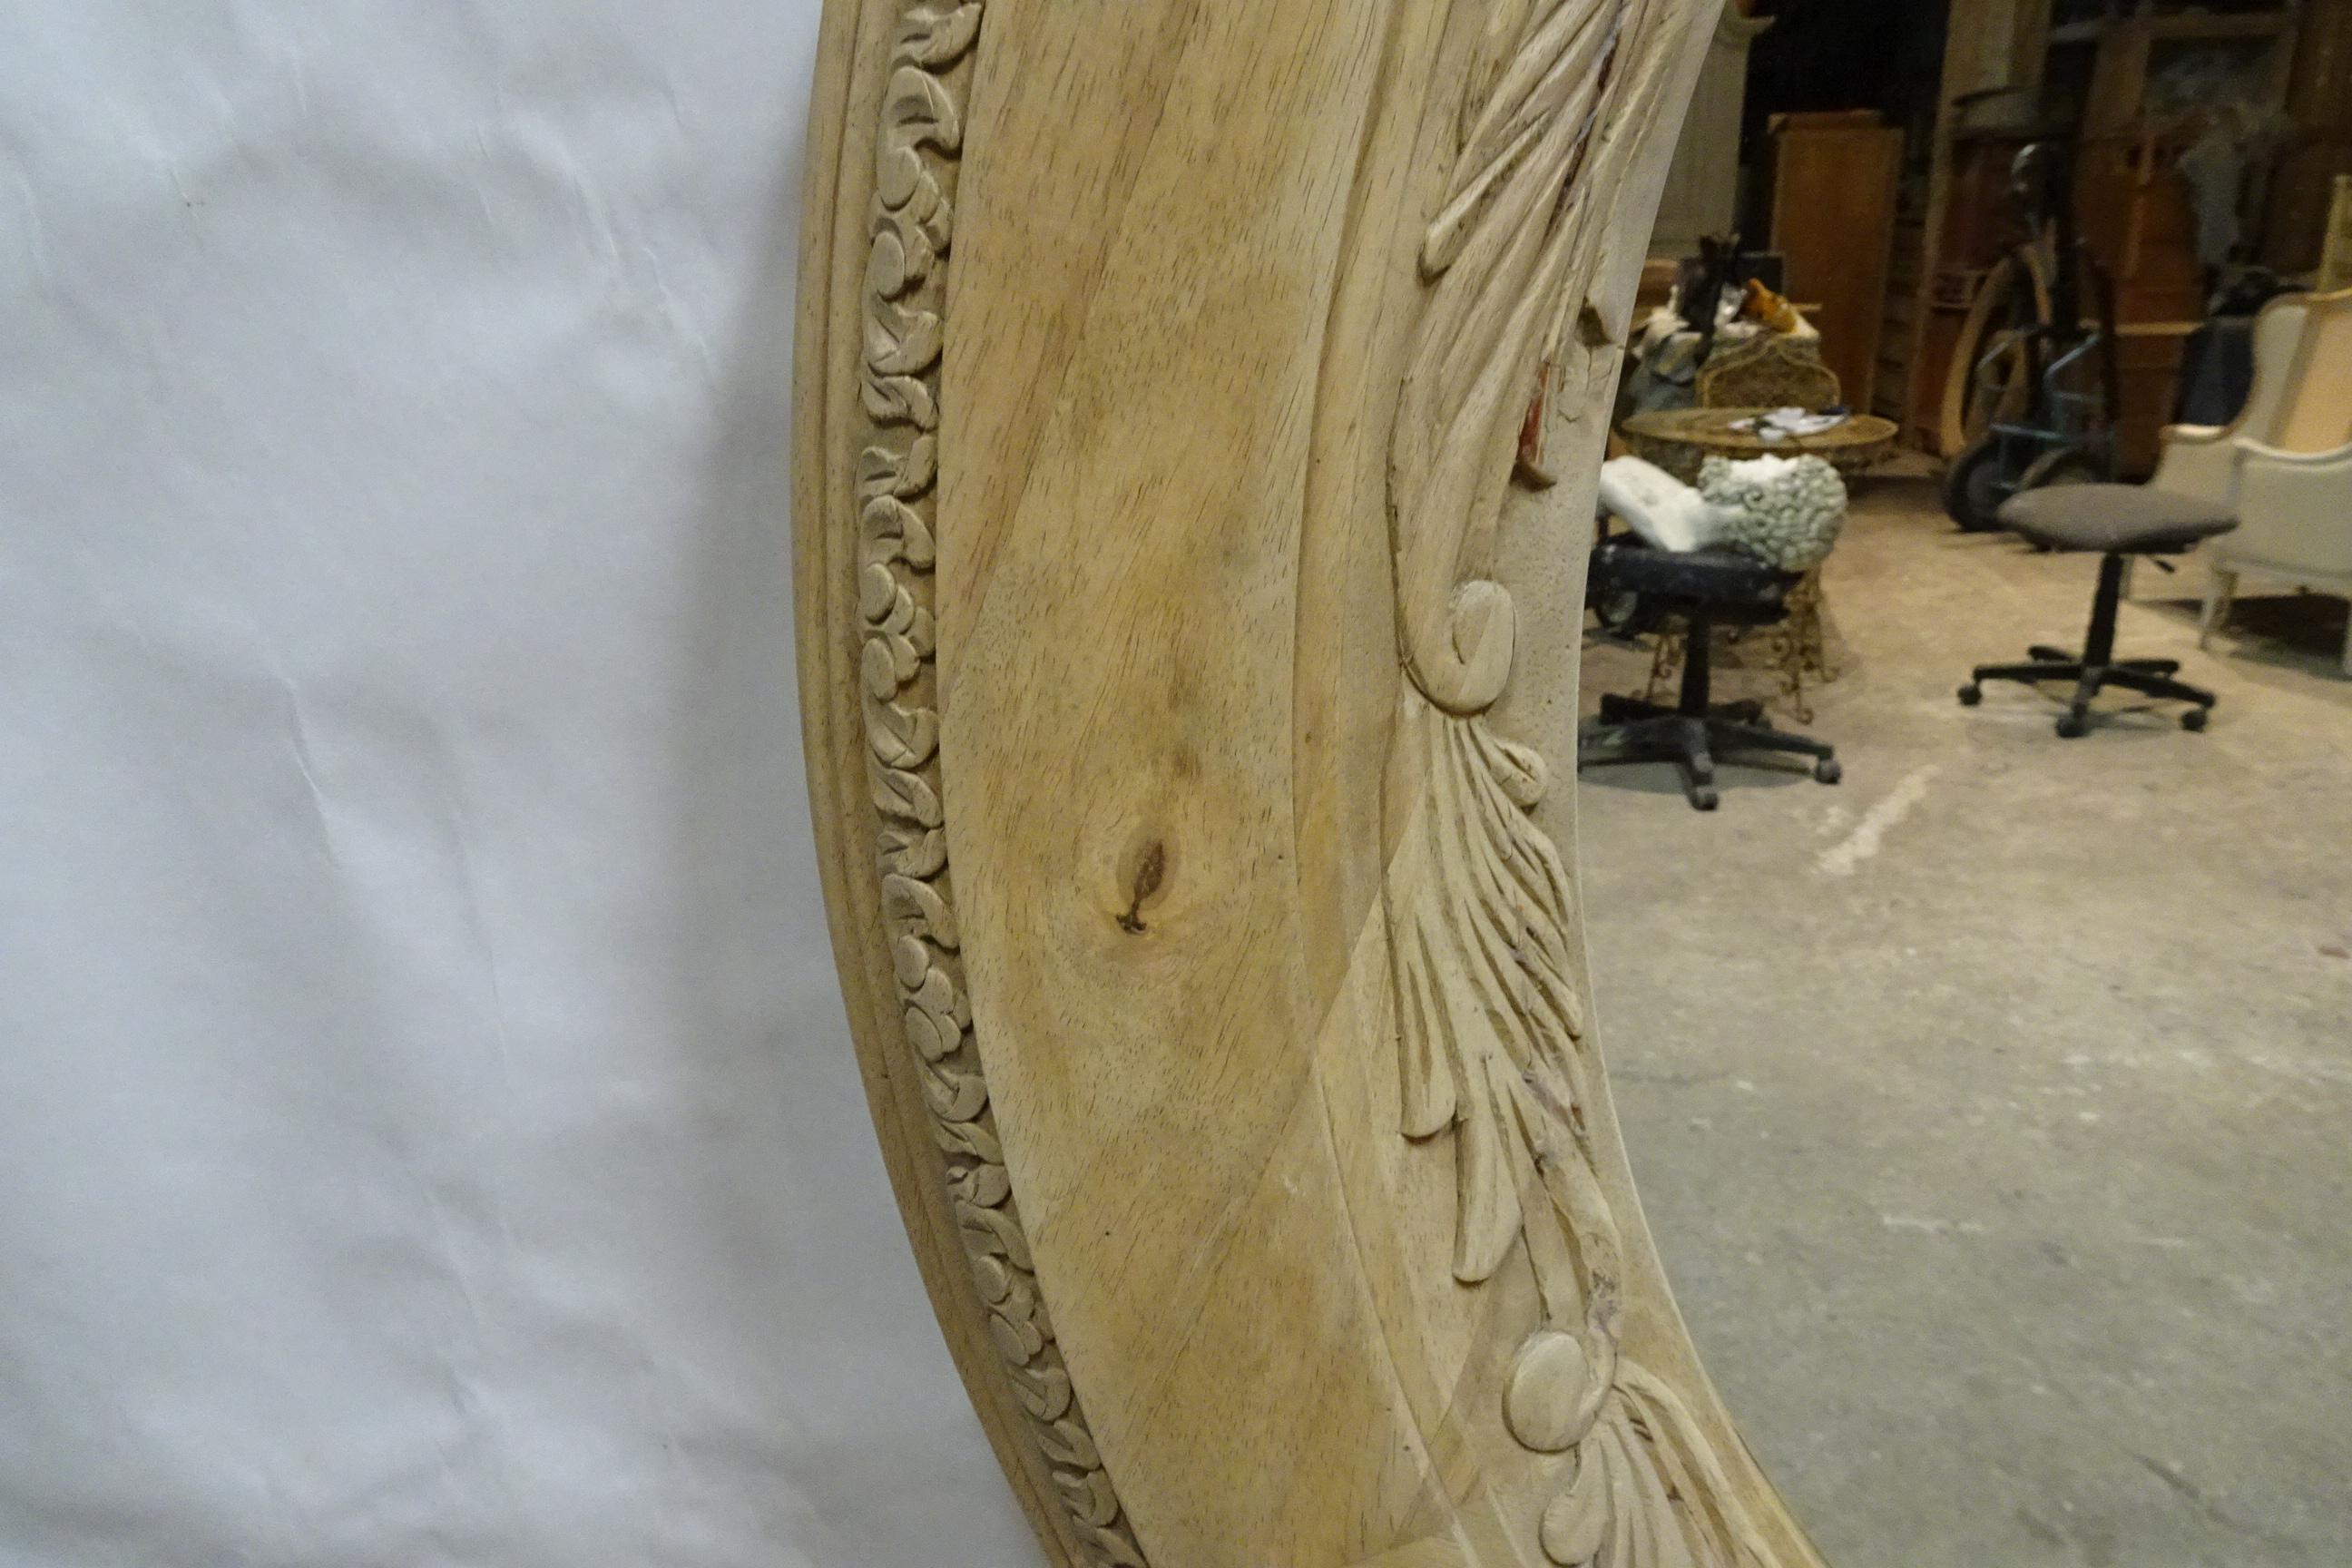 This is a Unique Hand Carved Round Wall Mirror. it had a dark brown stain on it so I stripped it to raw wood and left it that way.